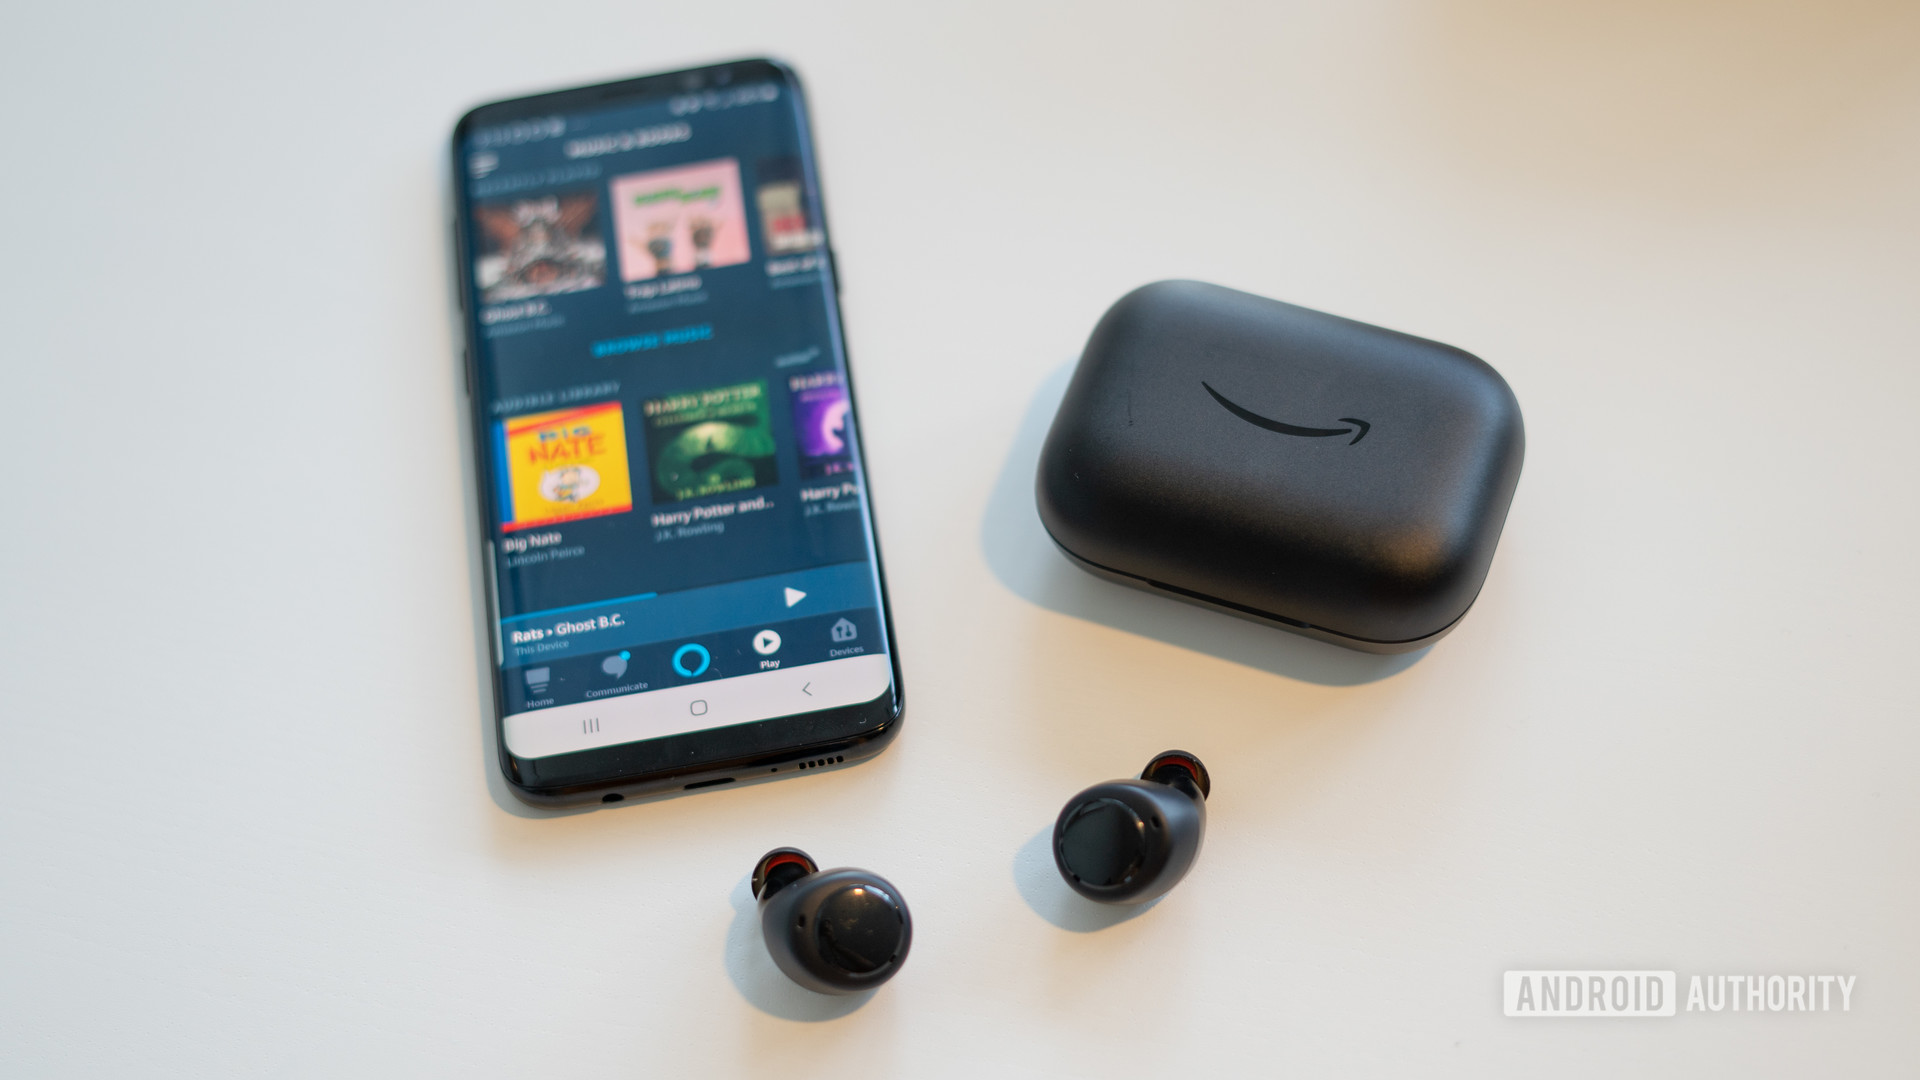 Amazon Echo Buds true wireless earbuds with the charging case and app.